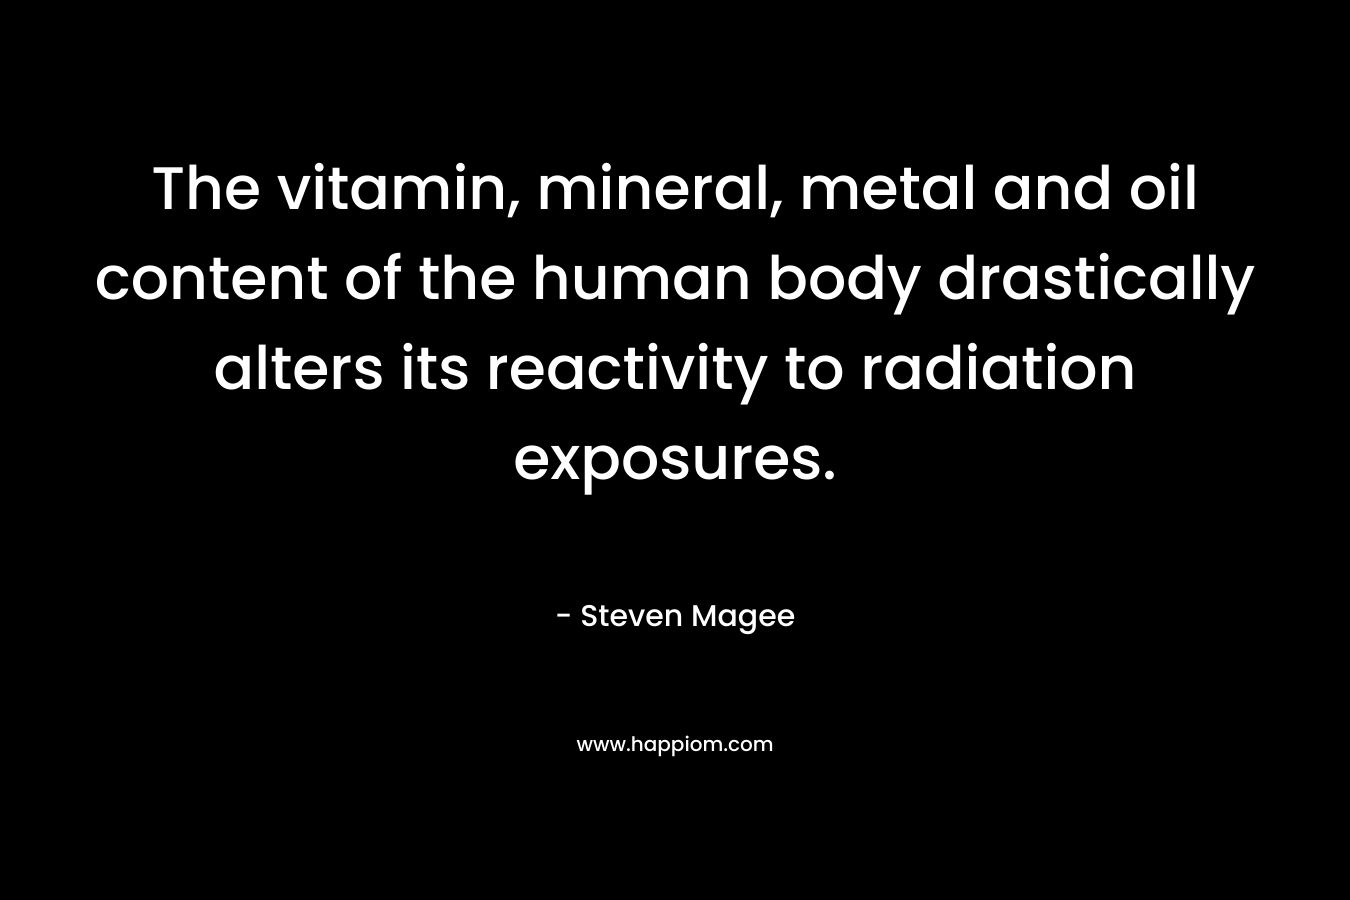 The vitamin, mineral, metal and oil content of the human body drastically alters its reactivity to radiation exposures. – Steven Magee